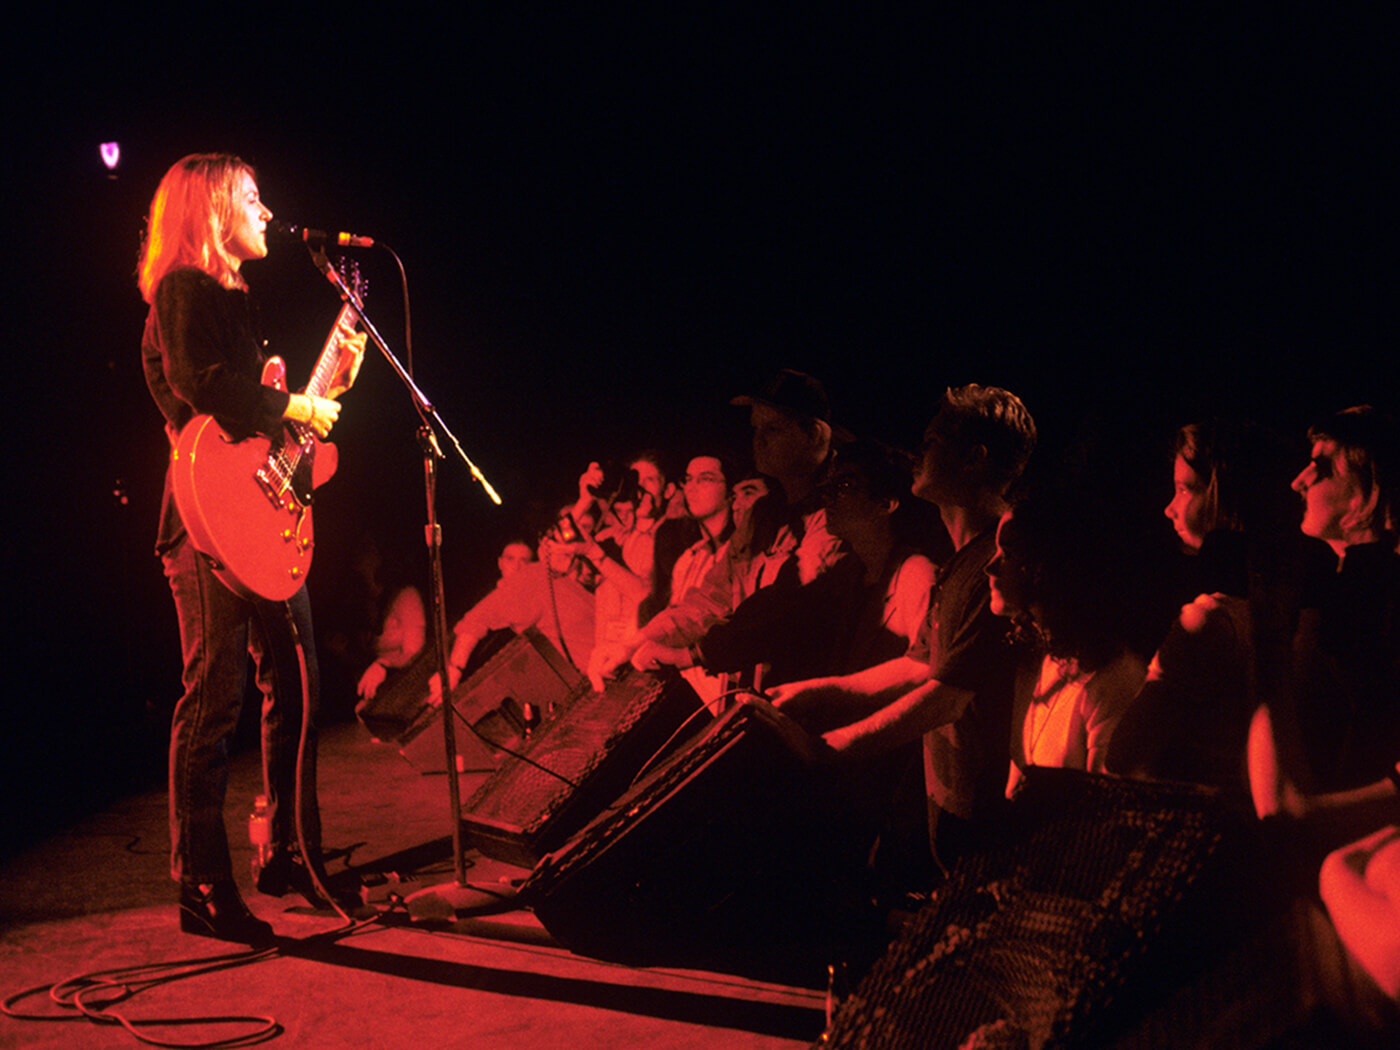 Liz Phair performing at the SXSW Music Festival in Austin, Texas in 1996 by Ebet Roberts/Redferns via Getty Images